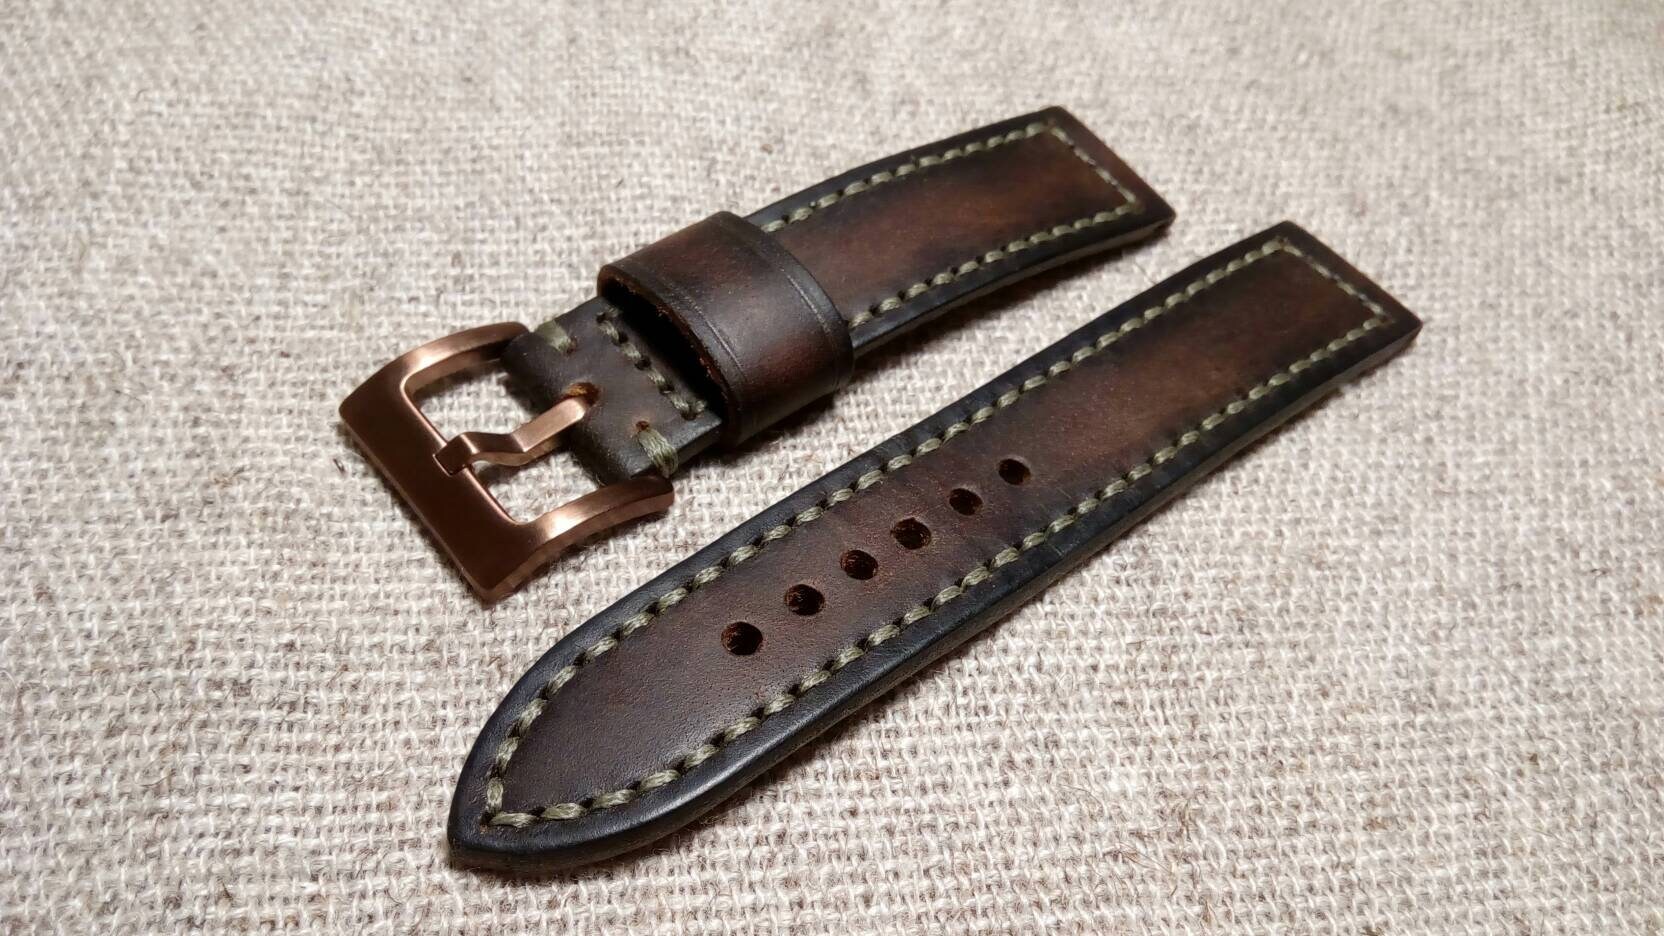 New Genuine Leather WATCH STRAP Handmade VINTAGE Style.22mm. | Etsy